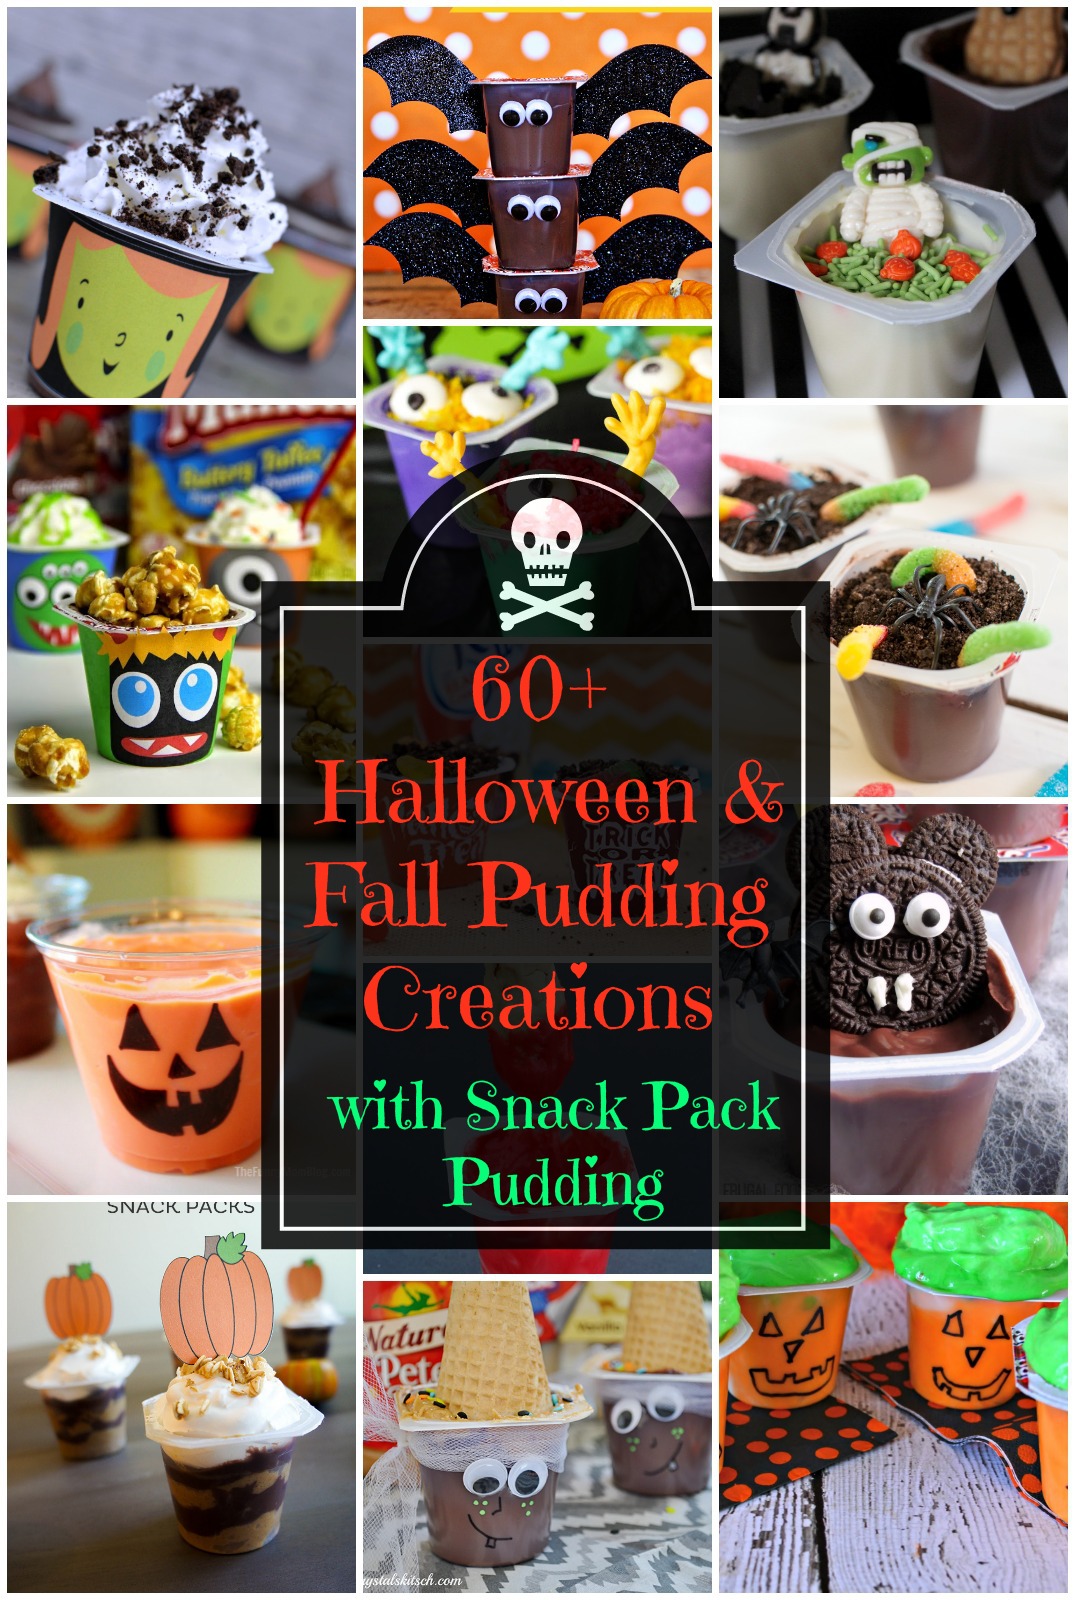 60+ Halloween & Fall Pudding Creations w/ Snack Pack Pudding